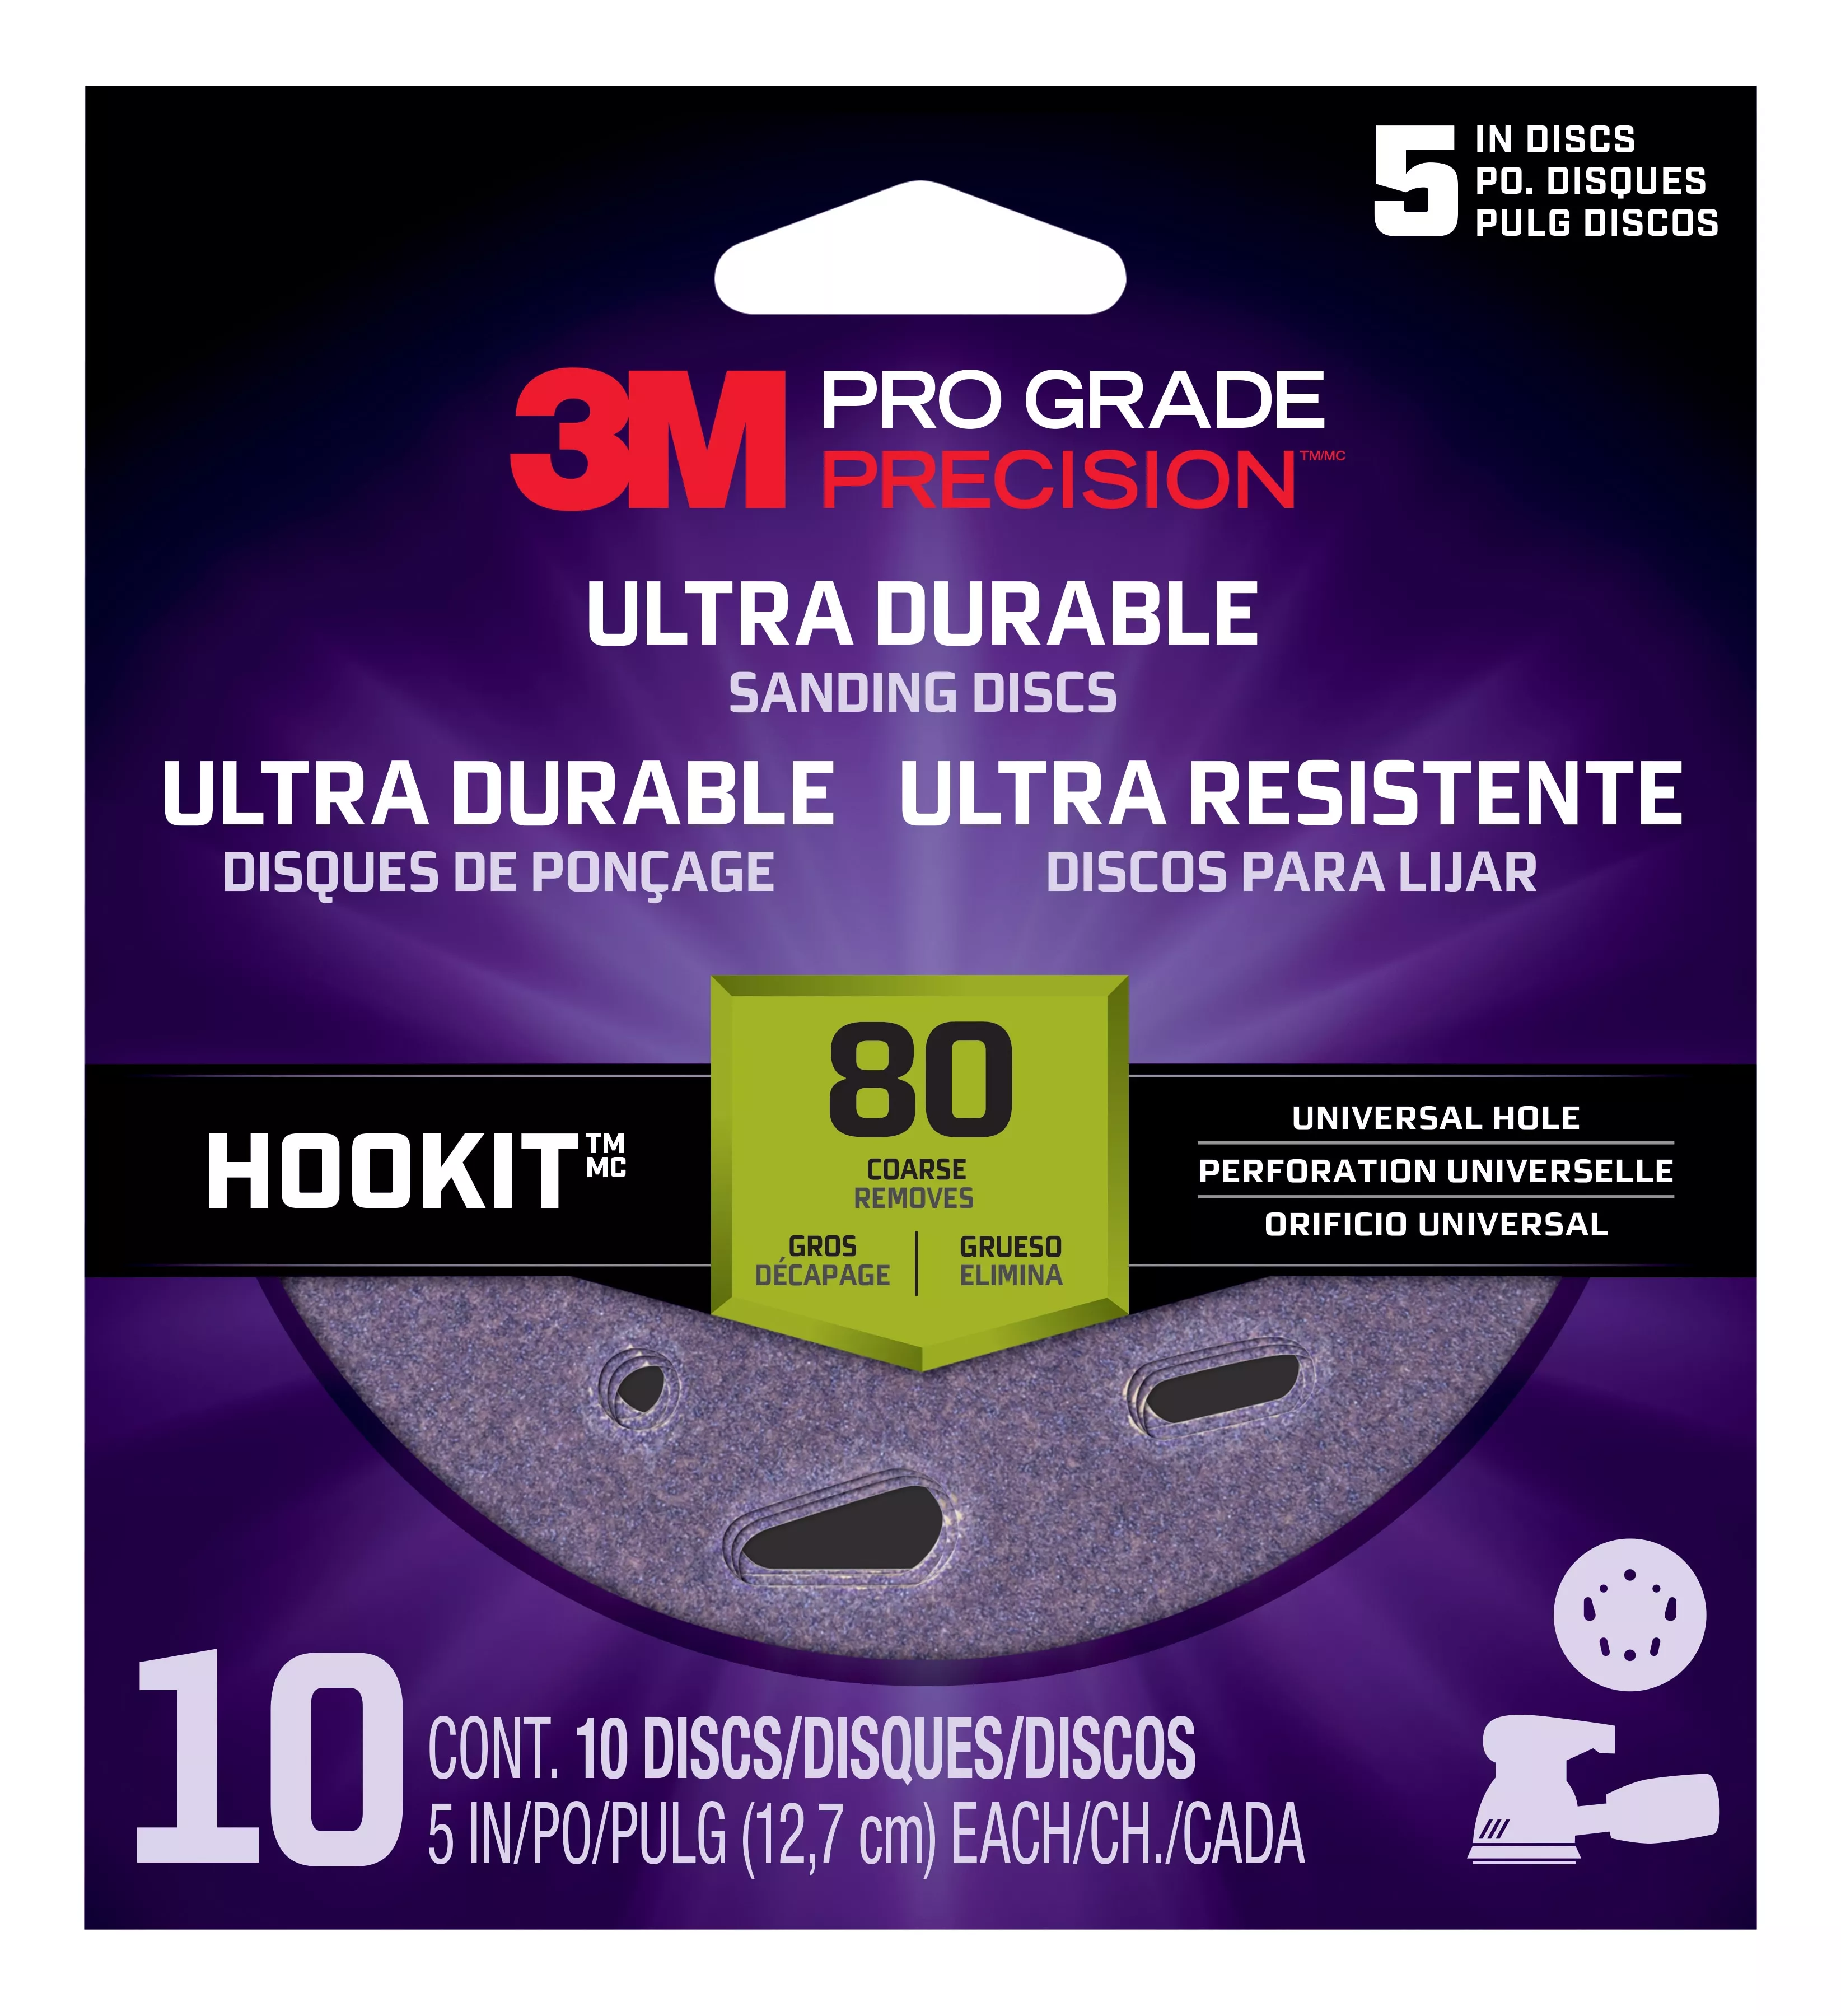 3M™ Pro Grade Precision™ Ultra Durable Universal Hole Sanding Disc,
DUH580TRI-10T, 5 IN x UH, 80, 10 pack